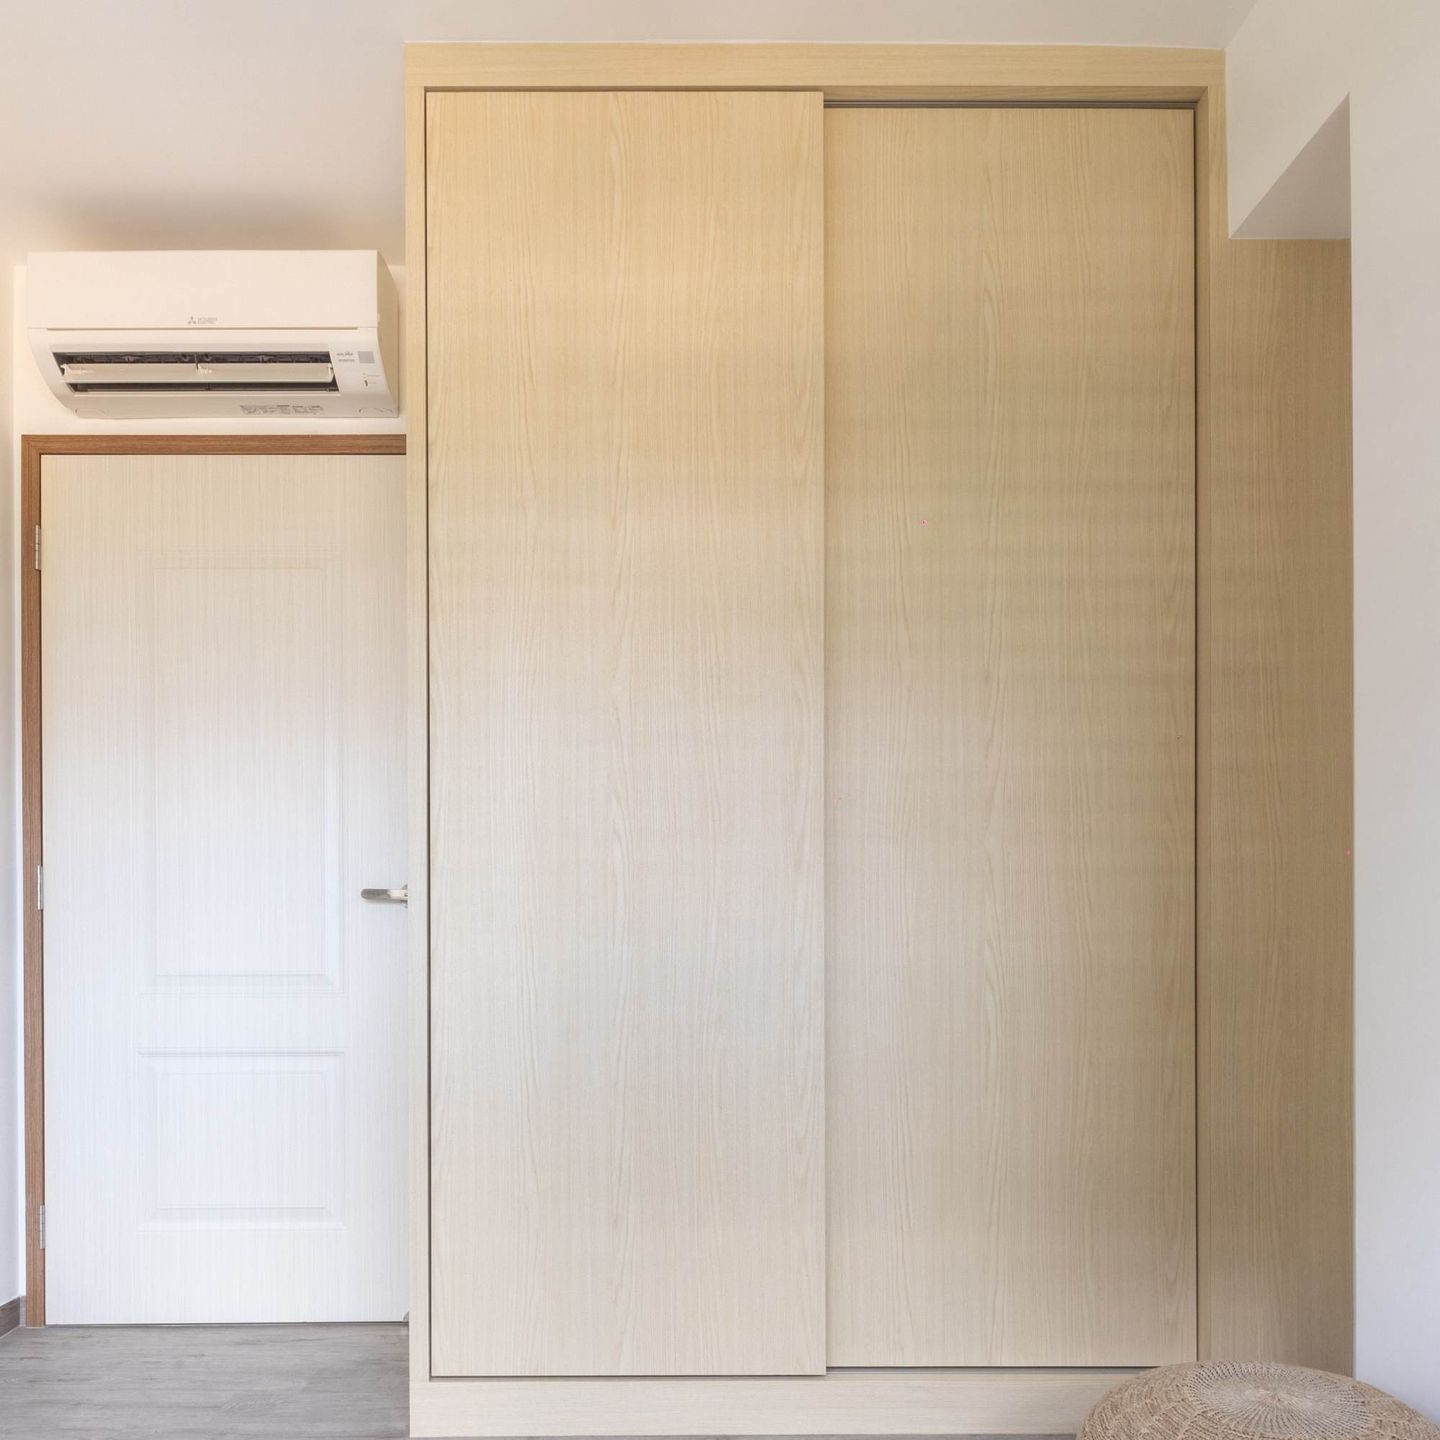 Wooden Laminate Design For Wardrobes With A Sliding Door - Livspace